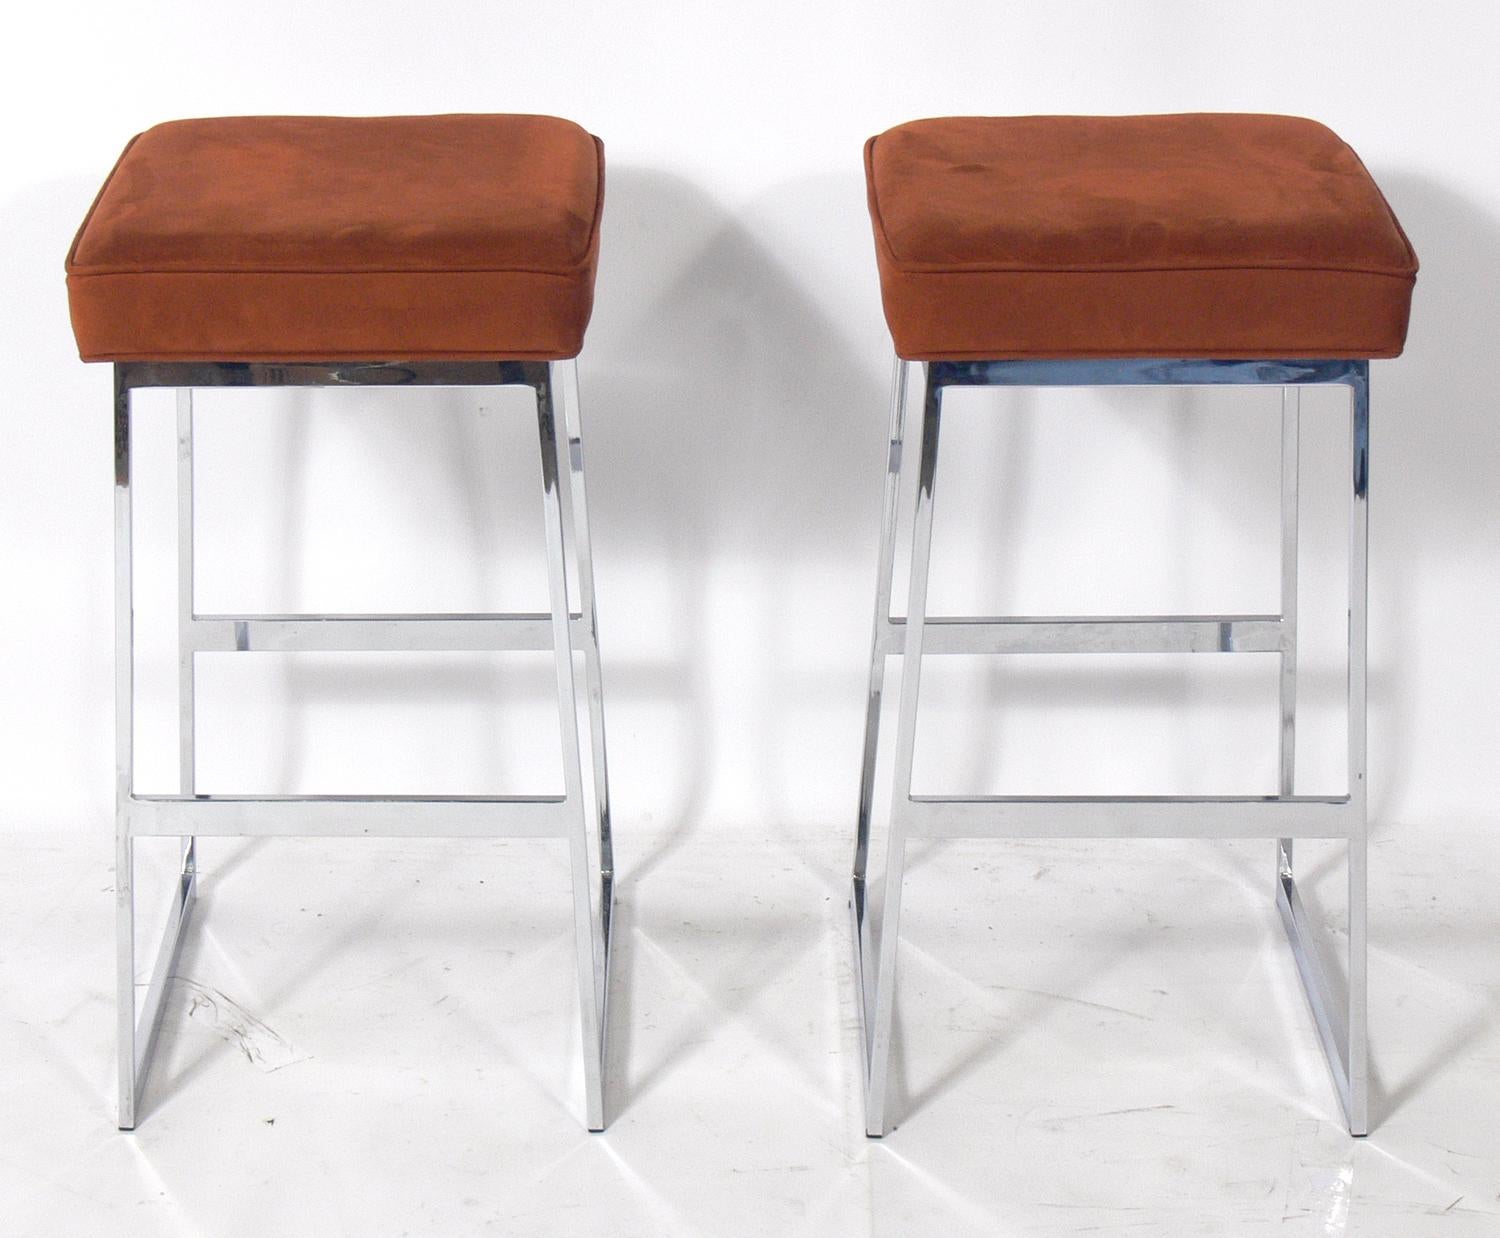 Chrome bar stools in the style of Milo Baughman, American, circa 1960s. They are currently being reupholstered and can be completed in your fabric. The price noted includes reupholstery in your fabric. Simply send us four yards total of your fabric